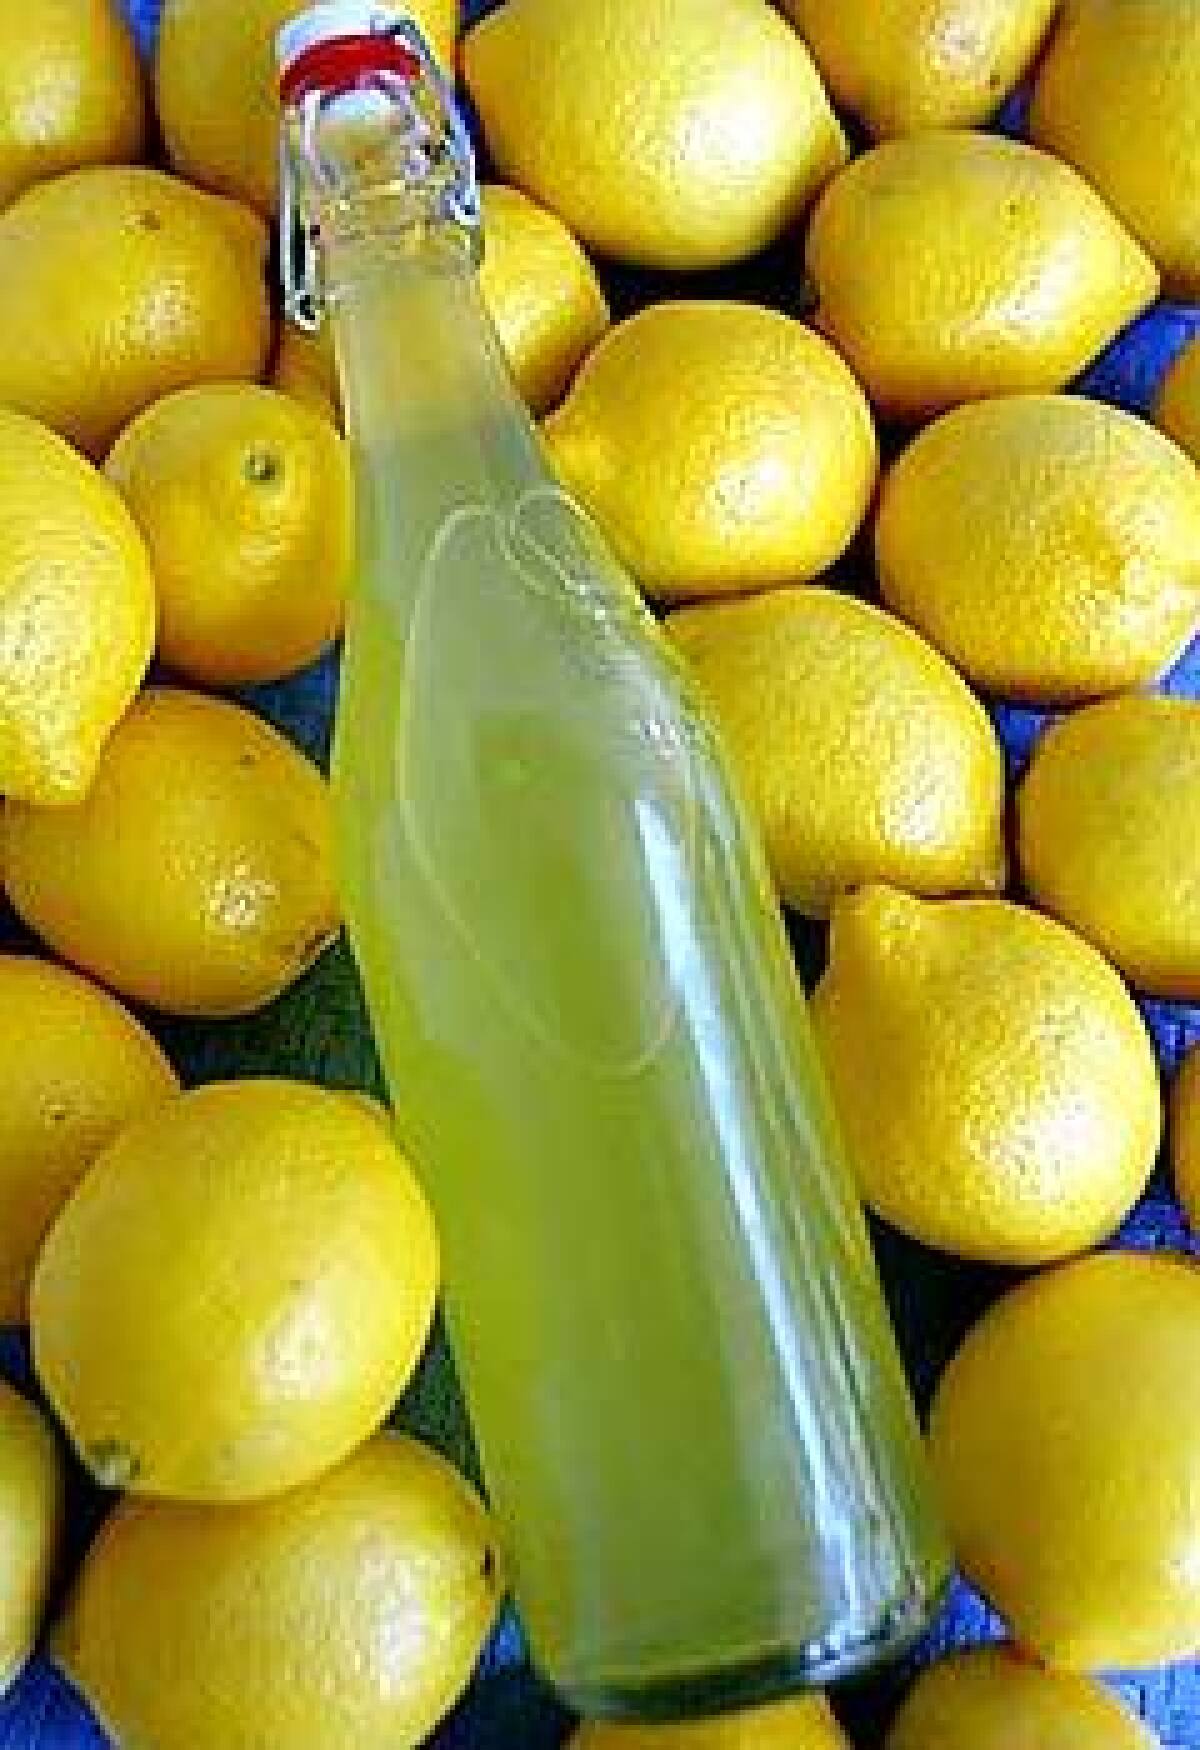 A wonderfully fresh-tasting version of the popular liqueur limoncello can be made with lemons and vodka. Or try lime or orange variations